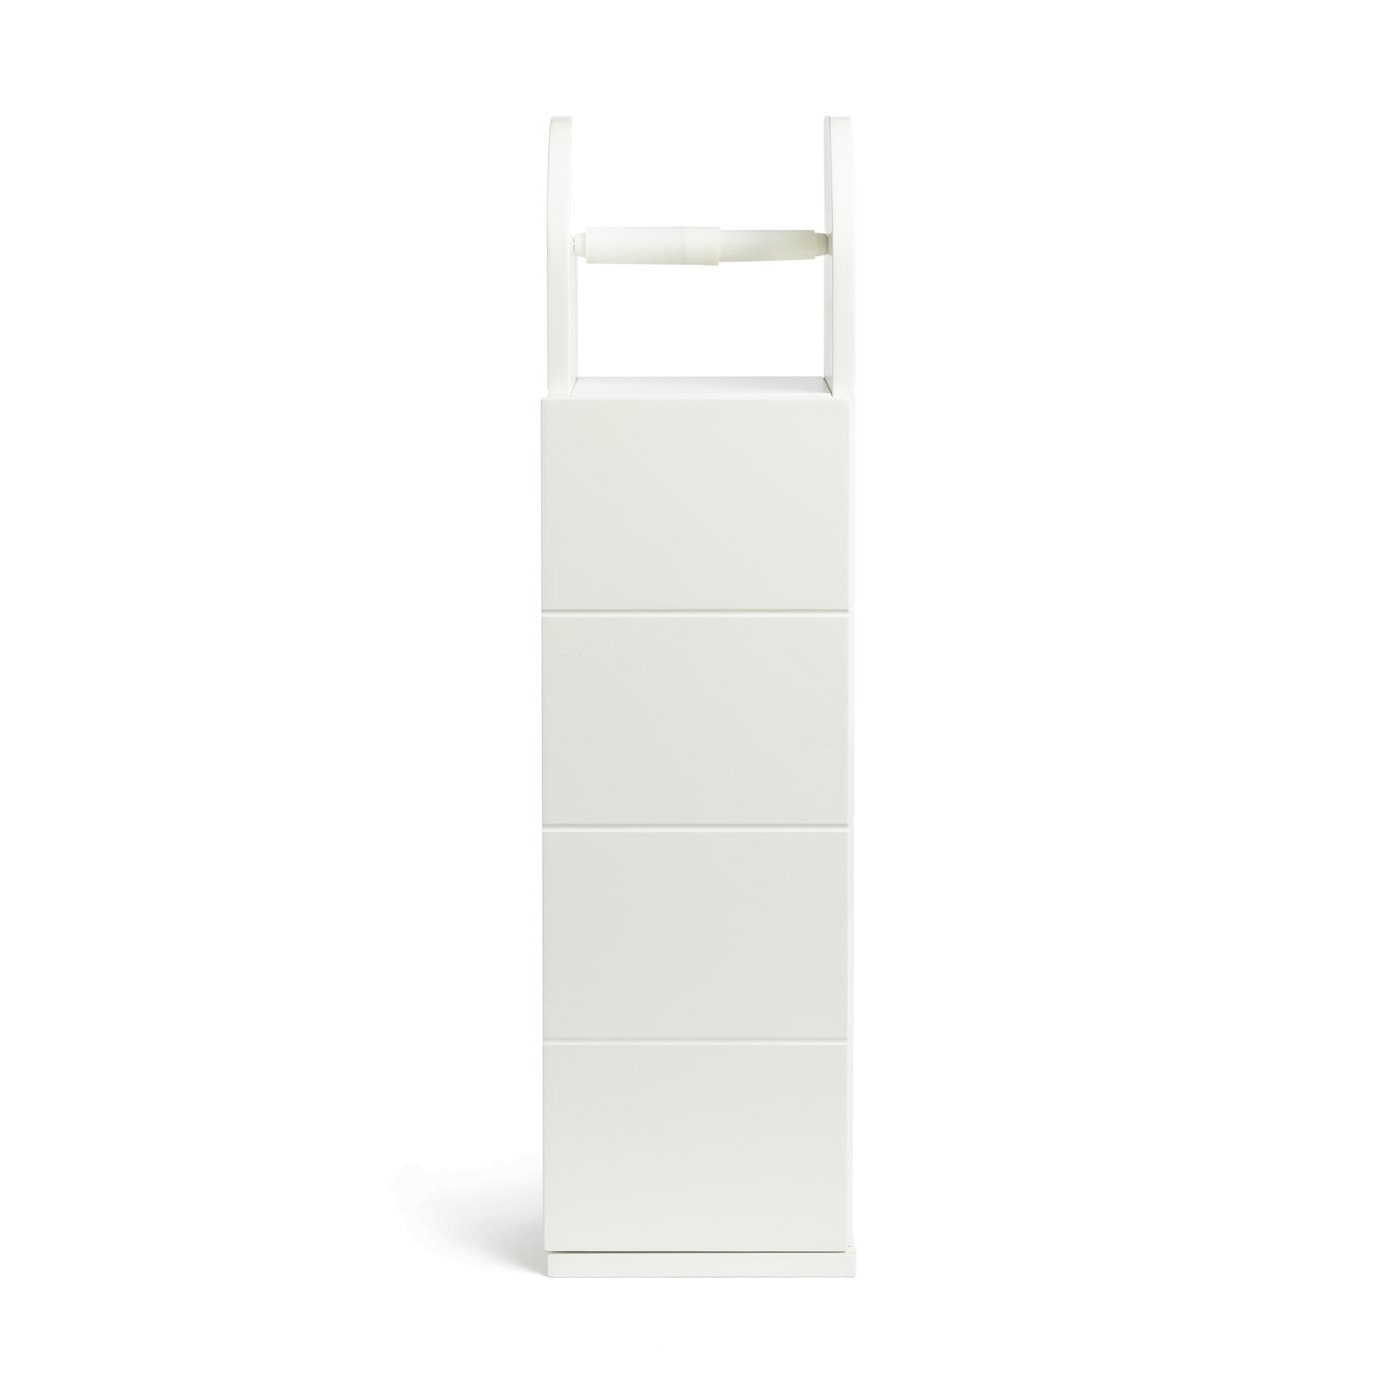 Habitat Tidy Cupboard with Toilet Roll Holder - White - image 1